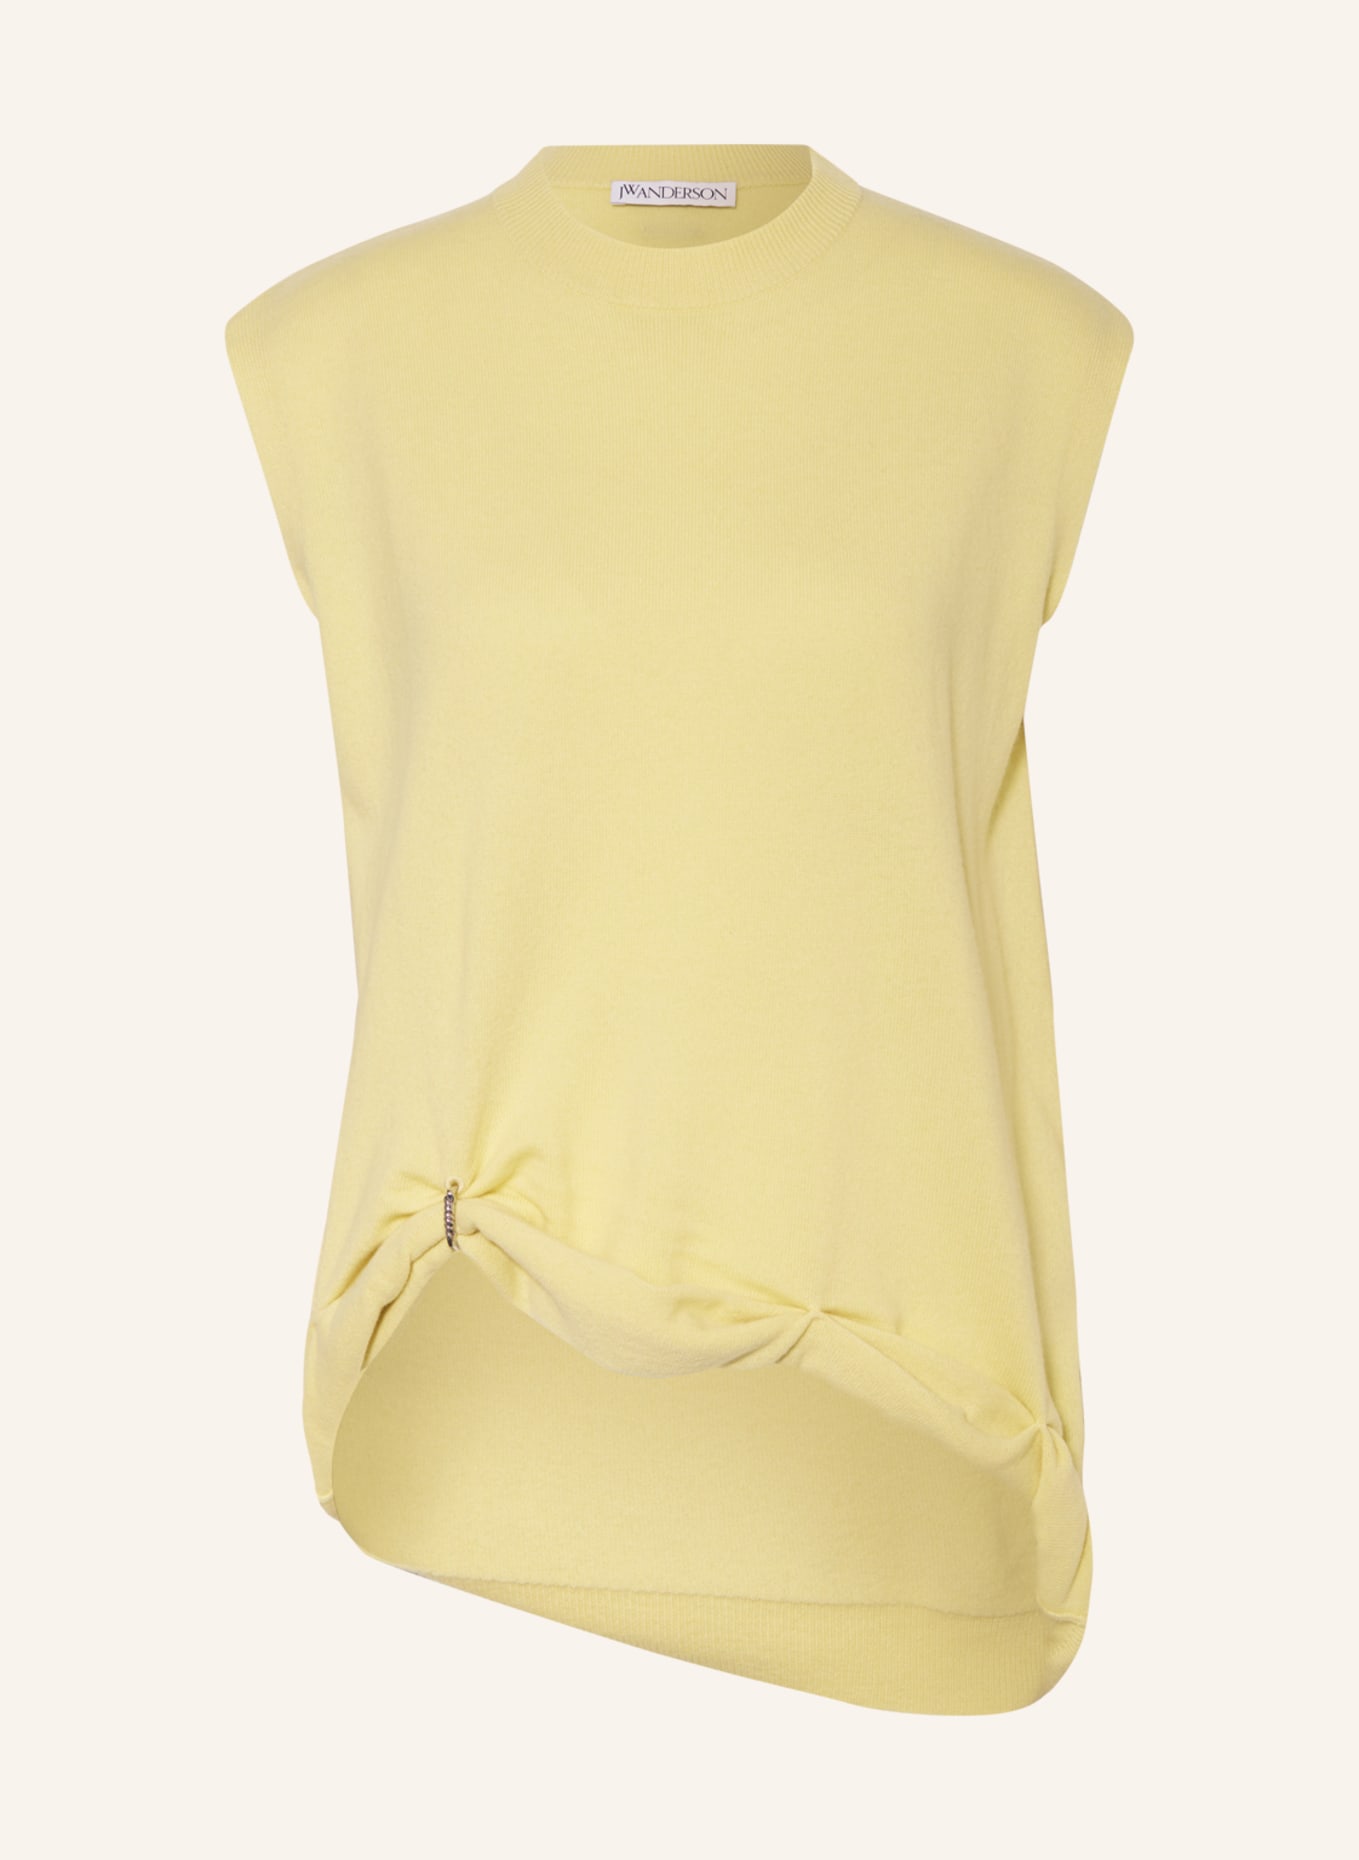 JW ANDERSON Sweater vest, Color: LIGHT YELLOW (Image 1)